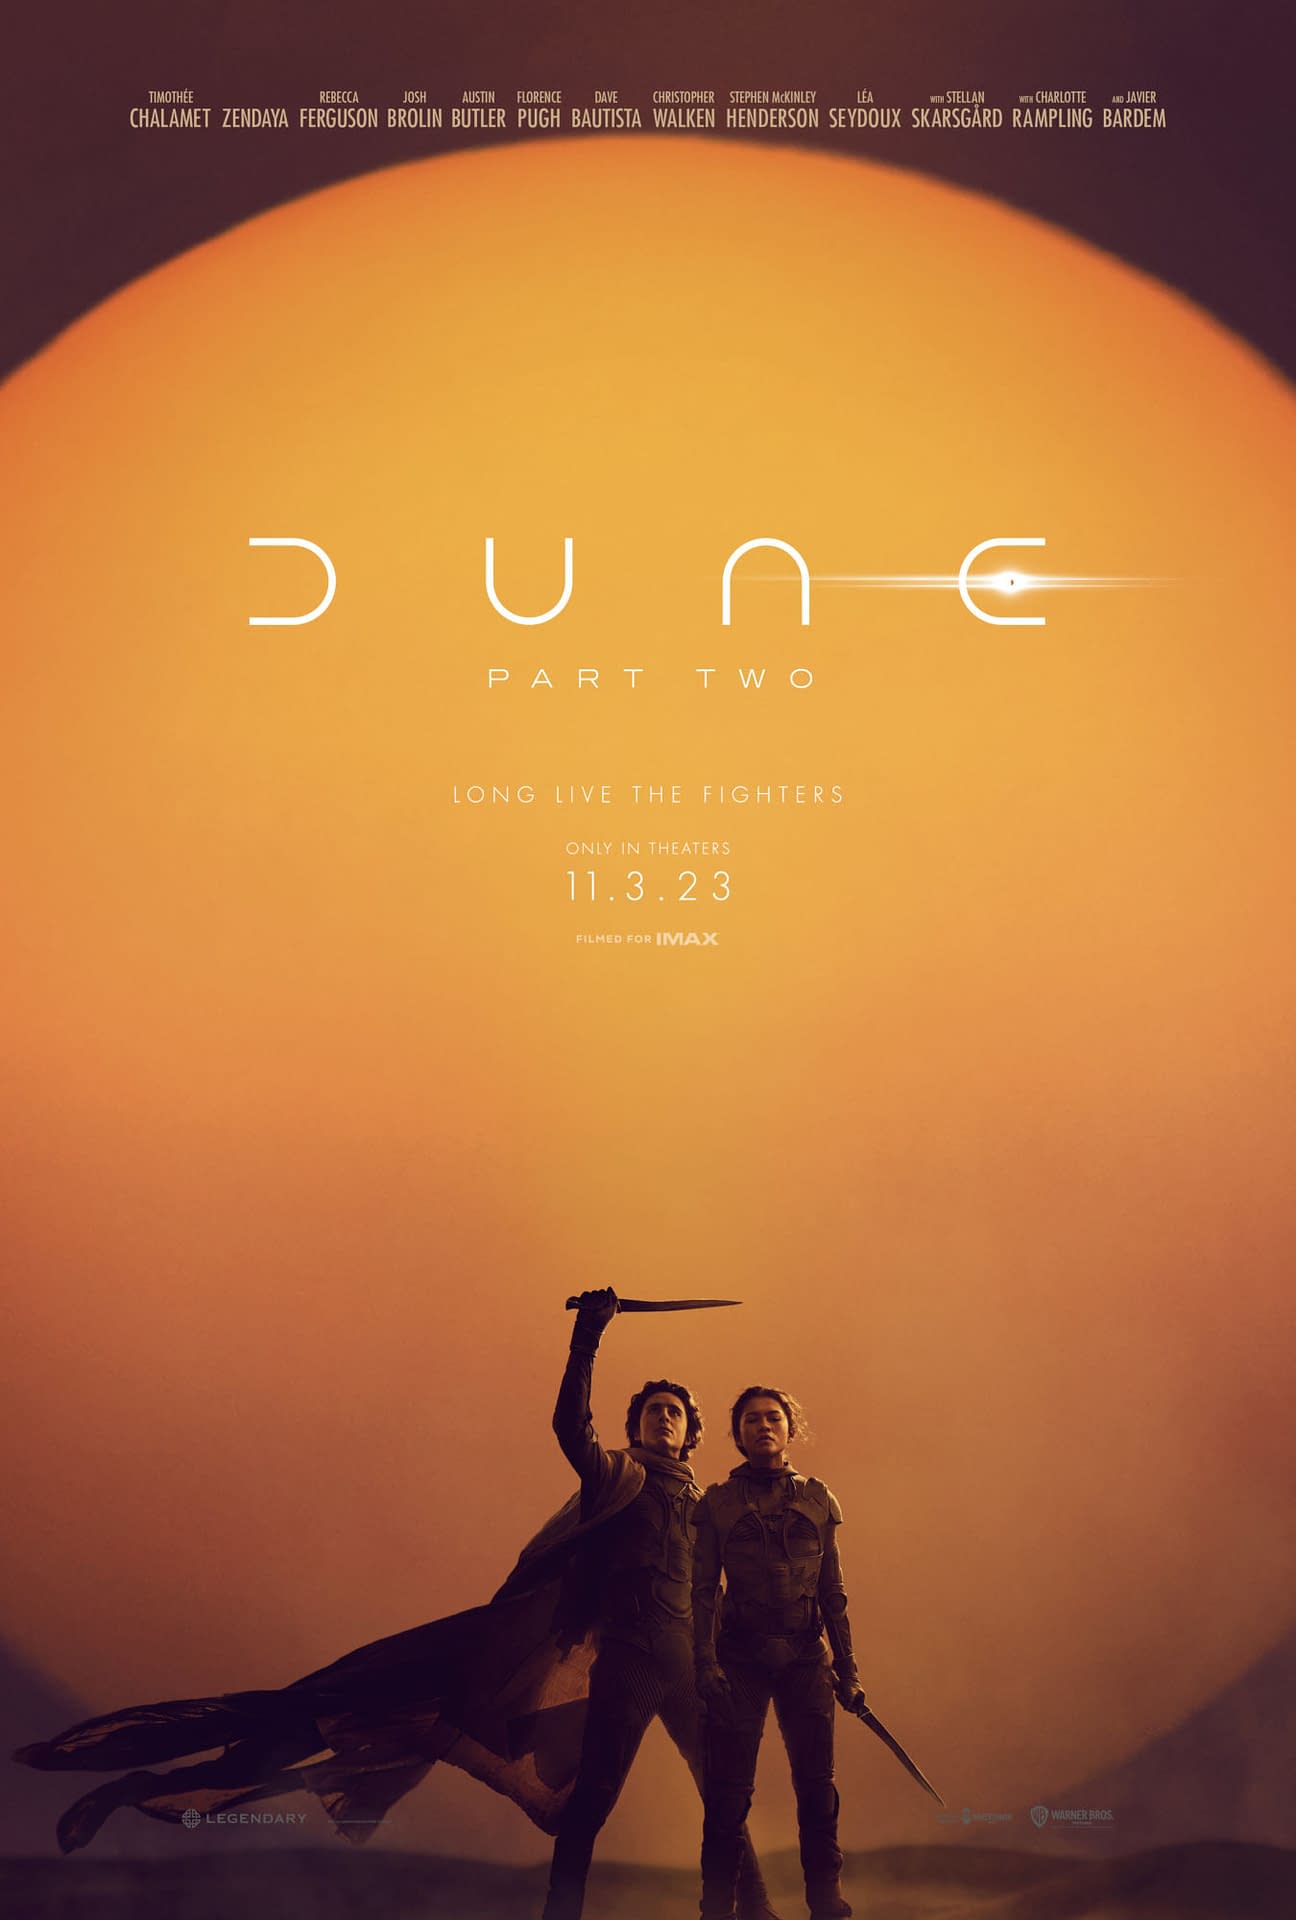 Dune Part Two First Poster Is Released Trailer Drops Tomorrow 